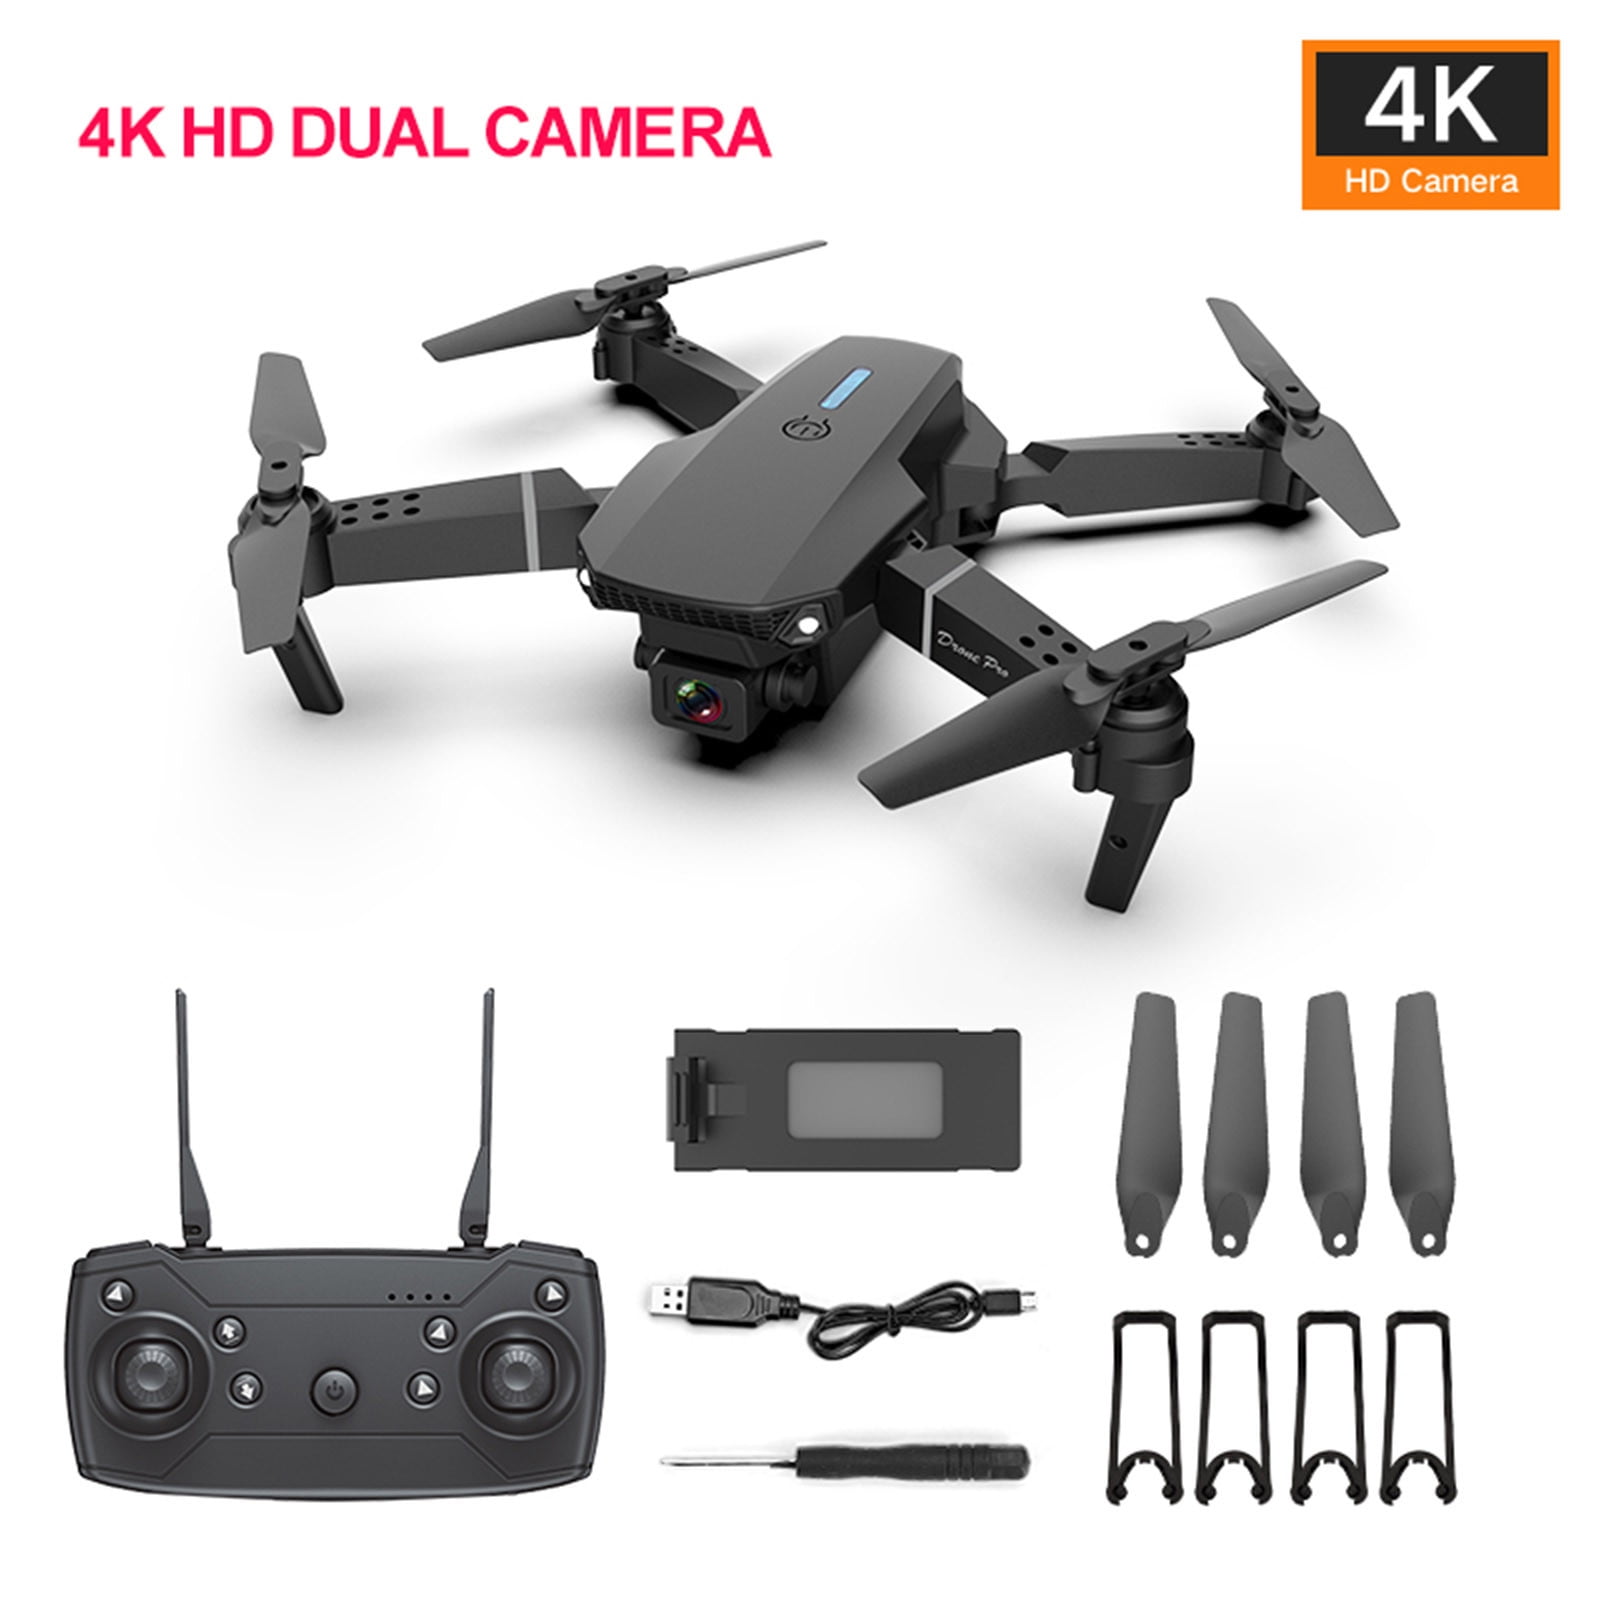 WUXICHEN E88 Pro Foldable 4K Dual Camera Drones Toys for Adults Kids, Mini  UAV RC Quadcopter with One Key Start/Return, Altitude Hold, Headless Mode,  Waypoints Functions, Gesture Control 